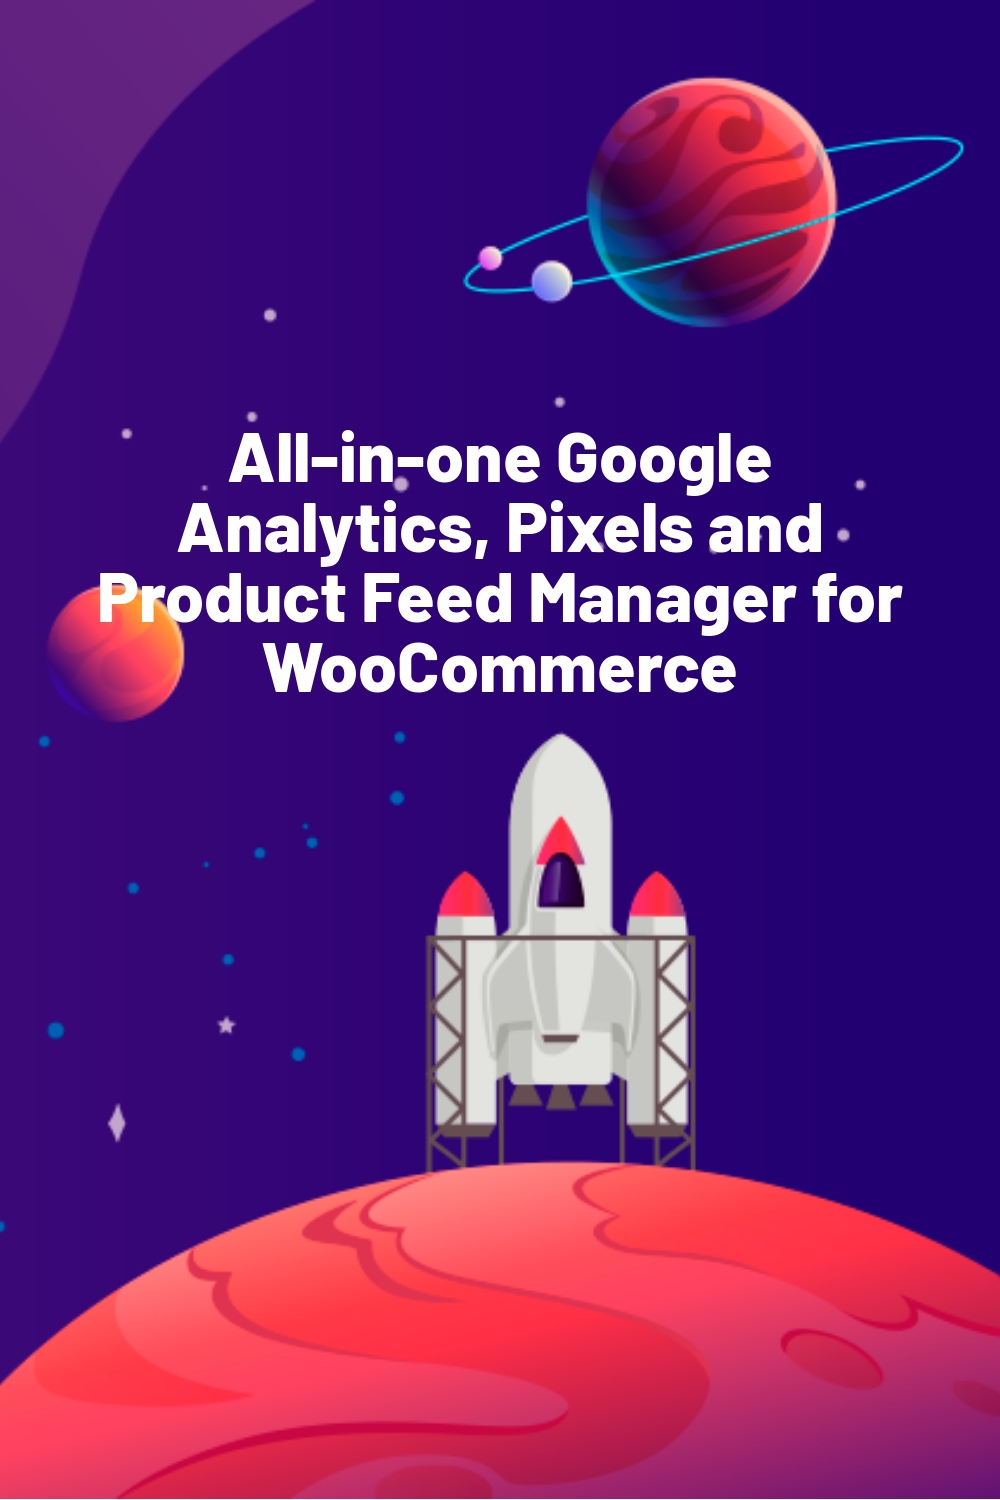 All-in-one Google Analytics, Pixels and Product Feed Manager for WooCommerce